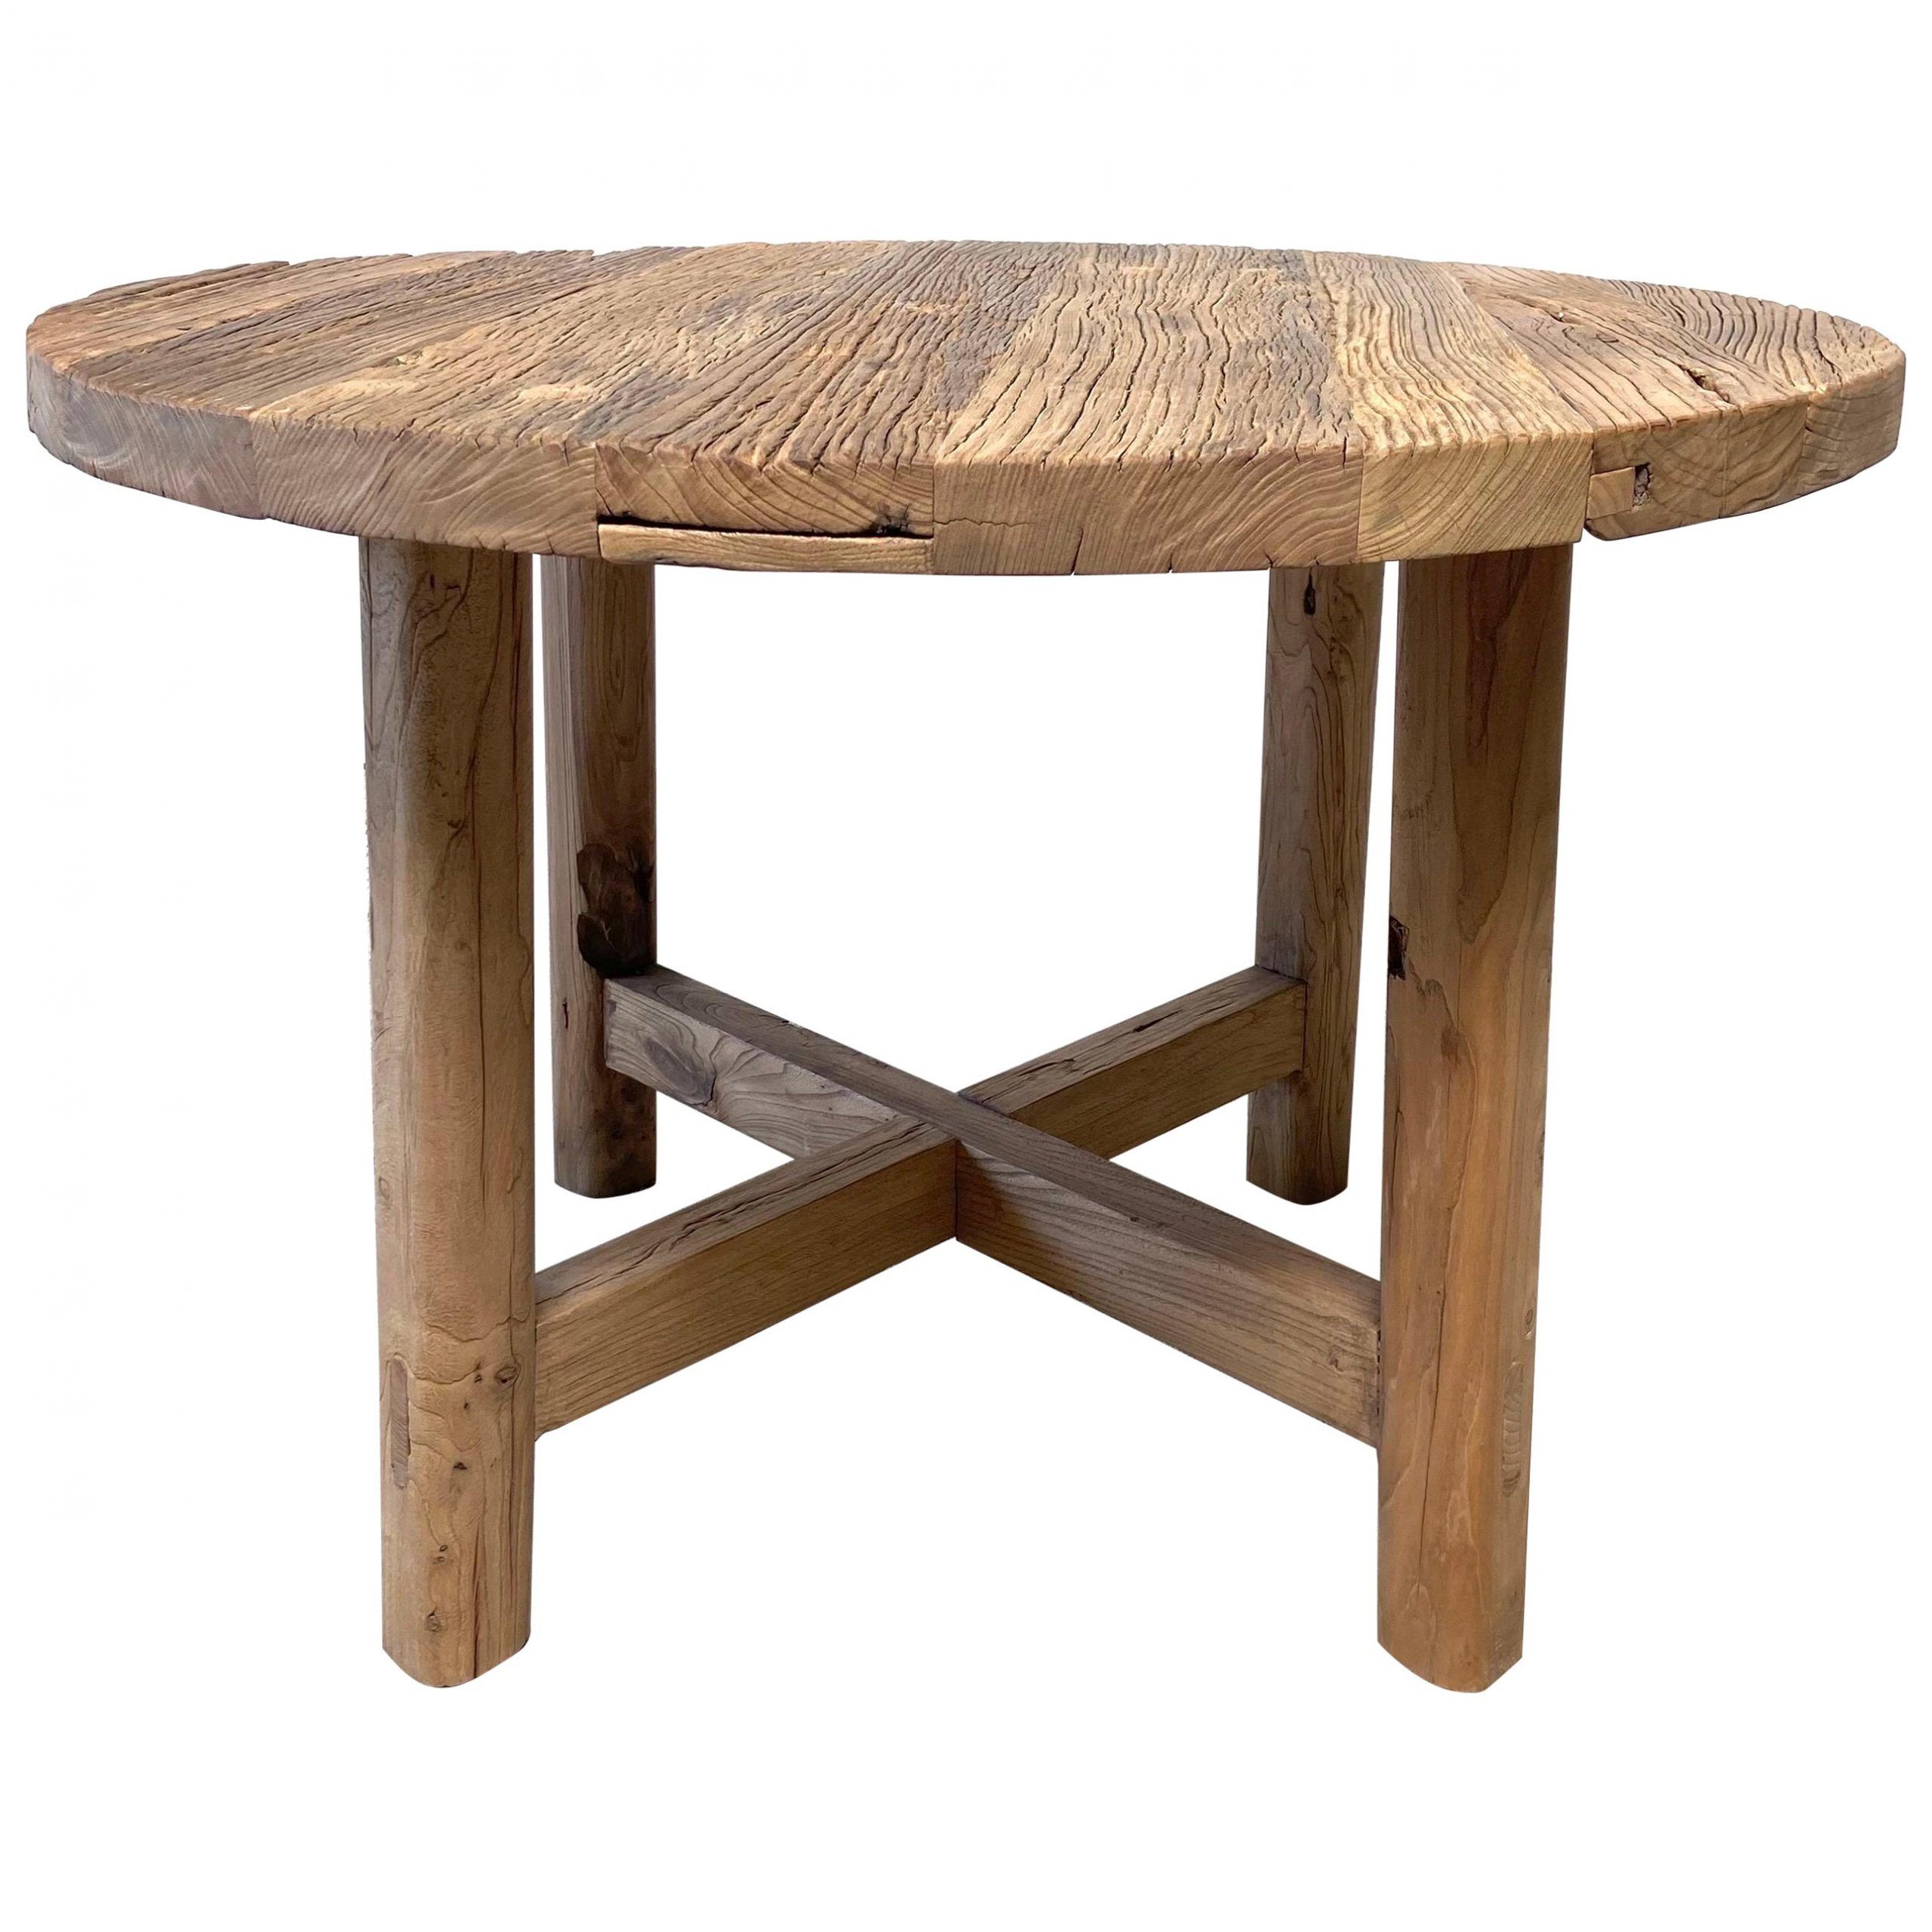 Reclaimed Elm Wood Outdoor Tables Intended For 2020 Custom Reclaimed Elm Wood Round Dining Table Dinette For Sale At 1stdibs (View 14 of 15)